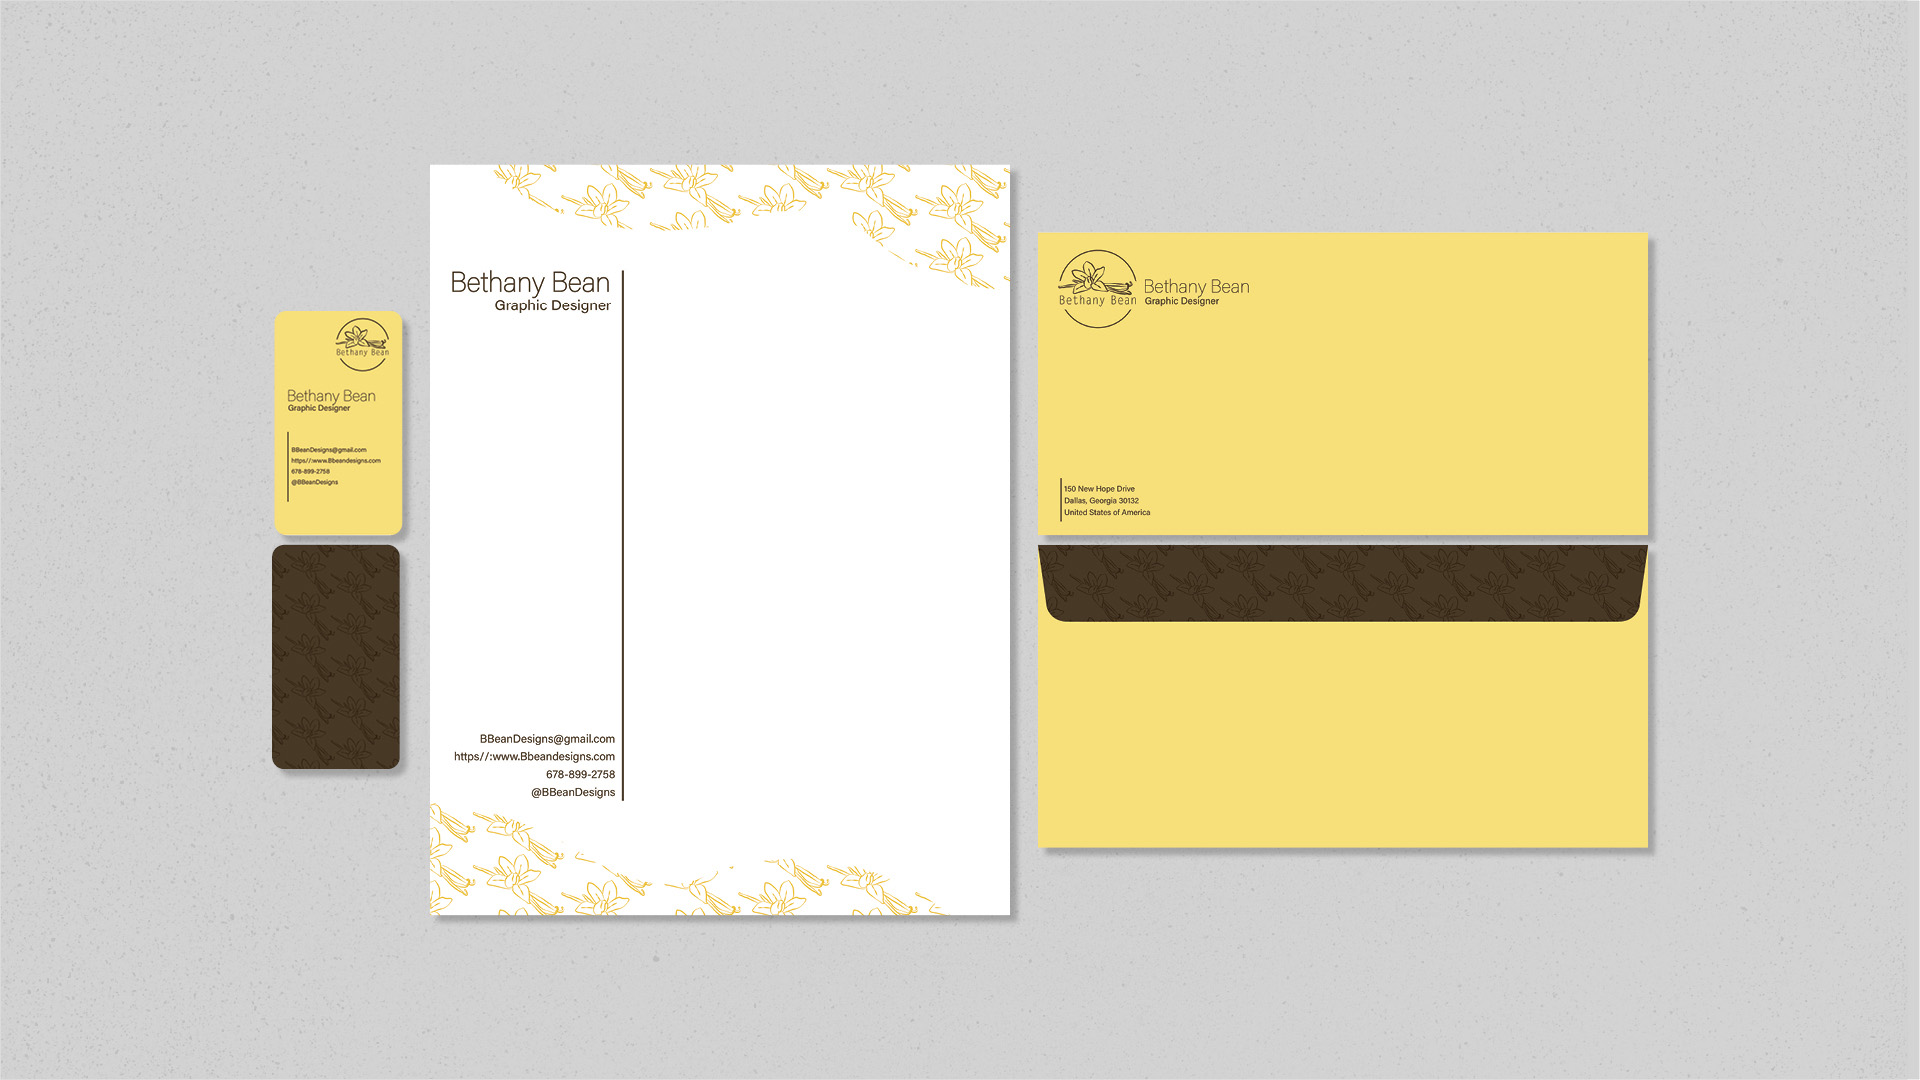 Self-Marketing Collateral, letterhead,  / Self-Marketing Collateral, letterhead, envelope, and business card, 8.5 x 11, 8.8 x 3.8, 3.5 x 2 inches printed stationary set, 2023. This set of stationery was designed to help advertise my brand to future clients.